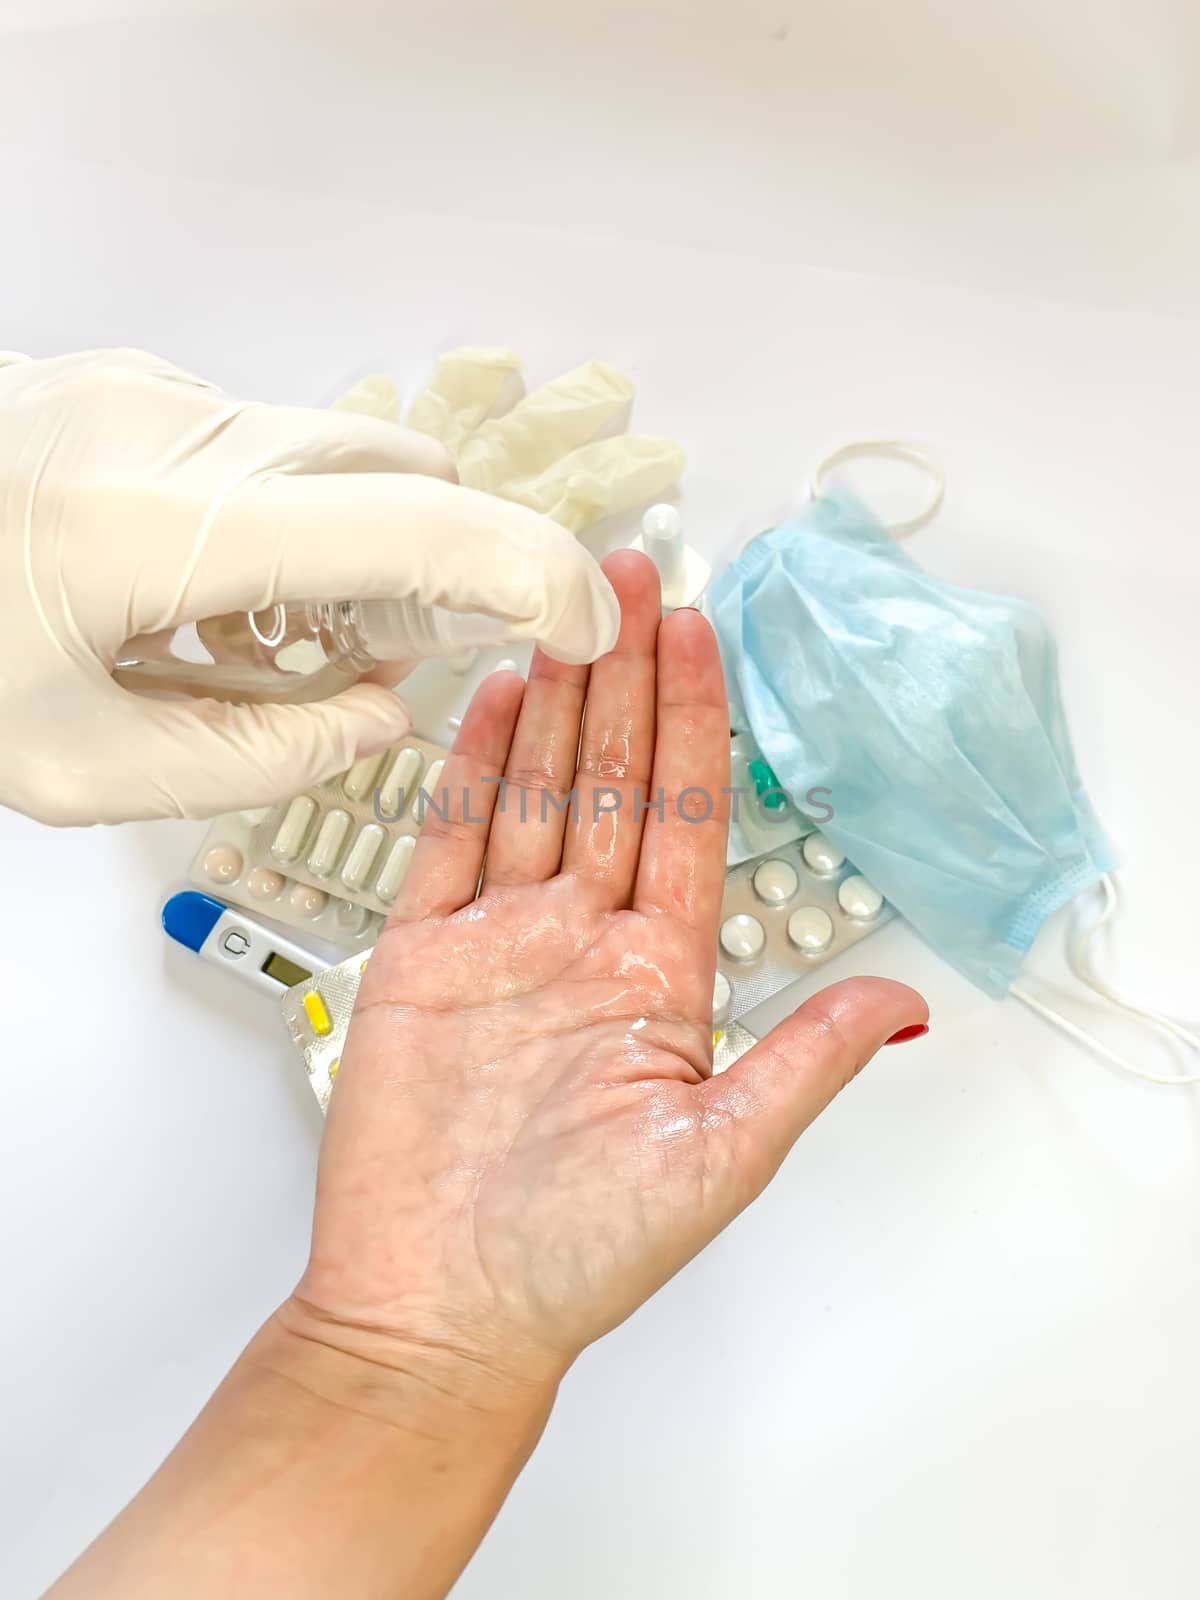 Hand of female in medical glove that applying alcohol spray or anti bacteria spray to prevent spread of germs, bacteria and virus on white background with medical tools and pills. Personal hygiene